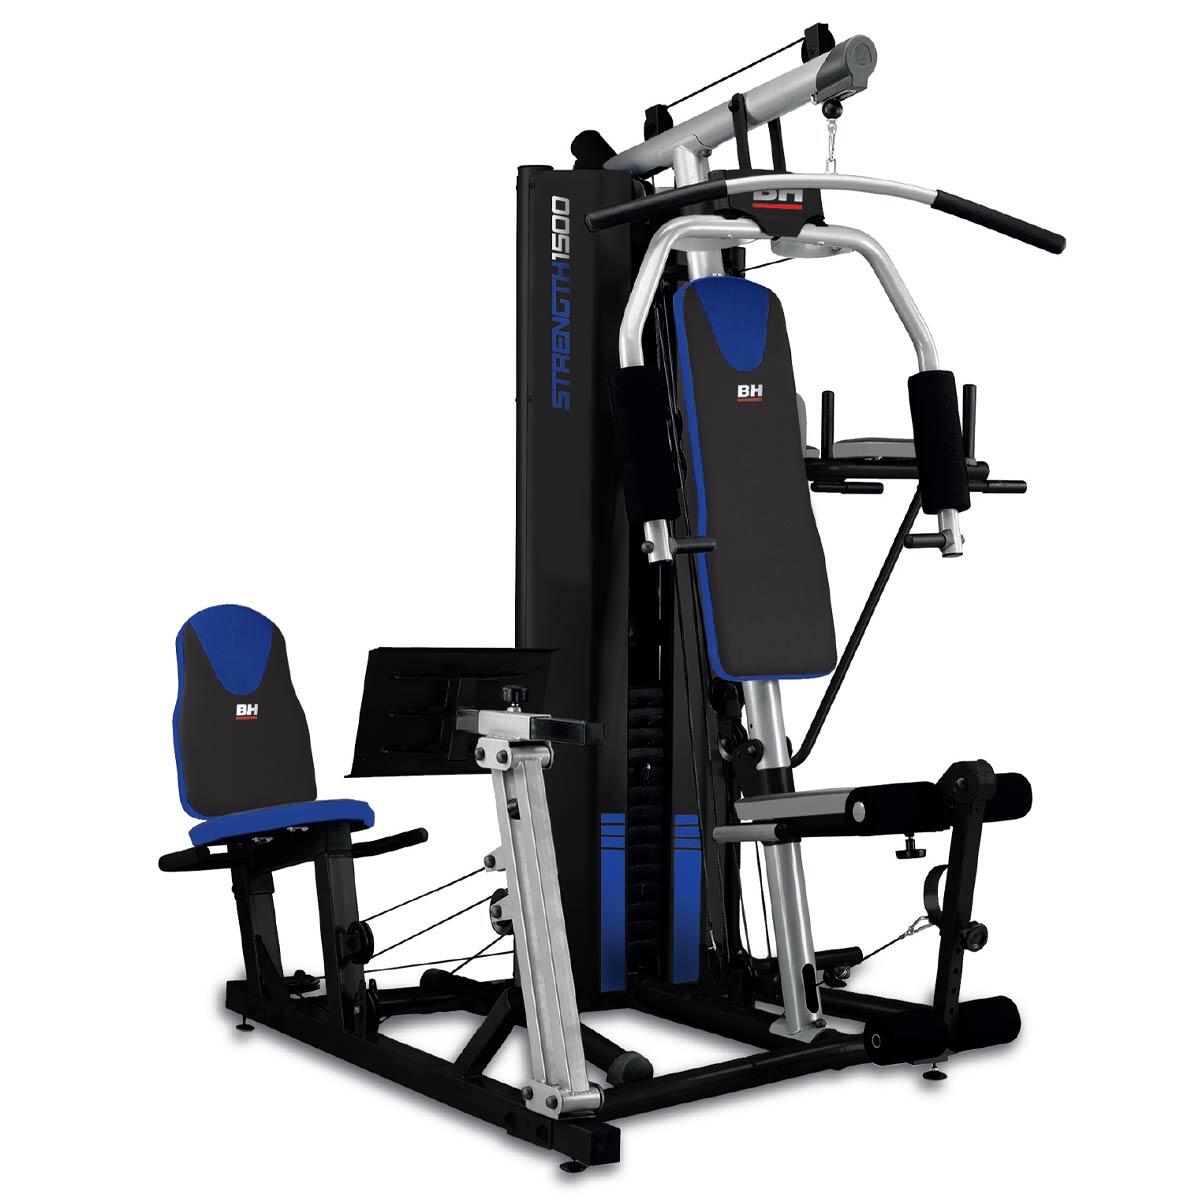 BH FITNESS BH FITNESS S1500 LIMITED EDITION COBALT BLUE HOME MULTI GYM